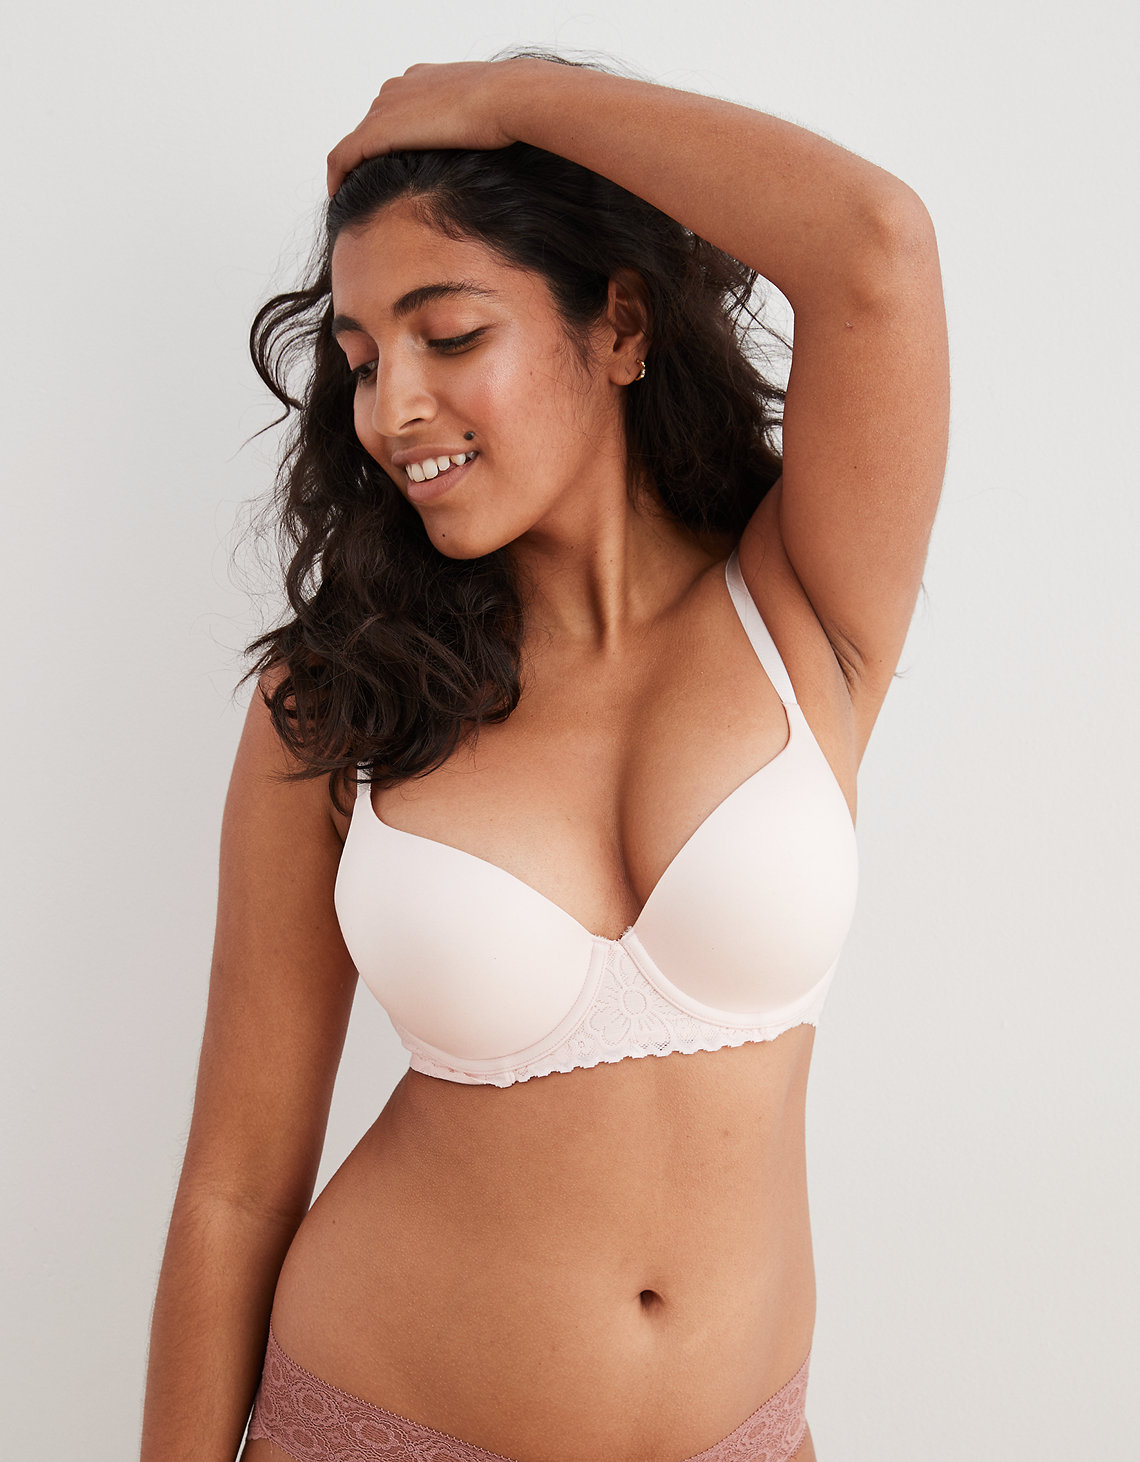 Aerie ad photos arent airbrushed - Business Insider